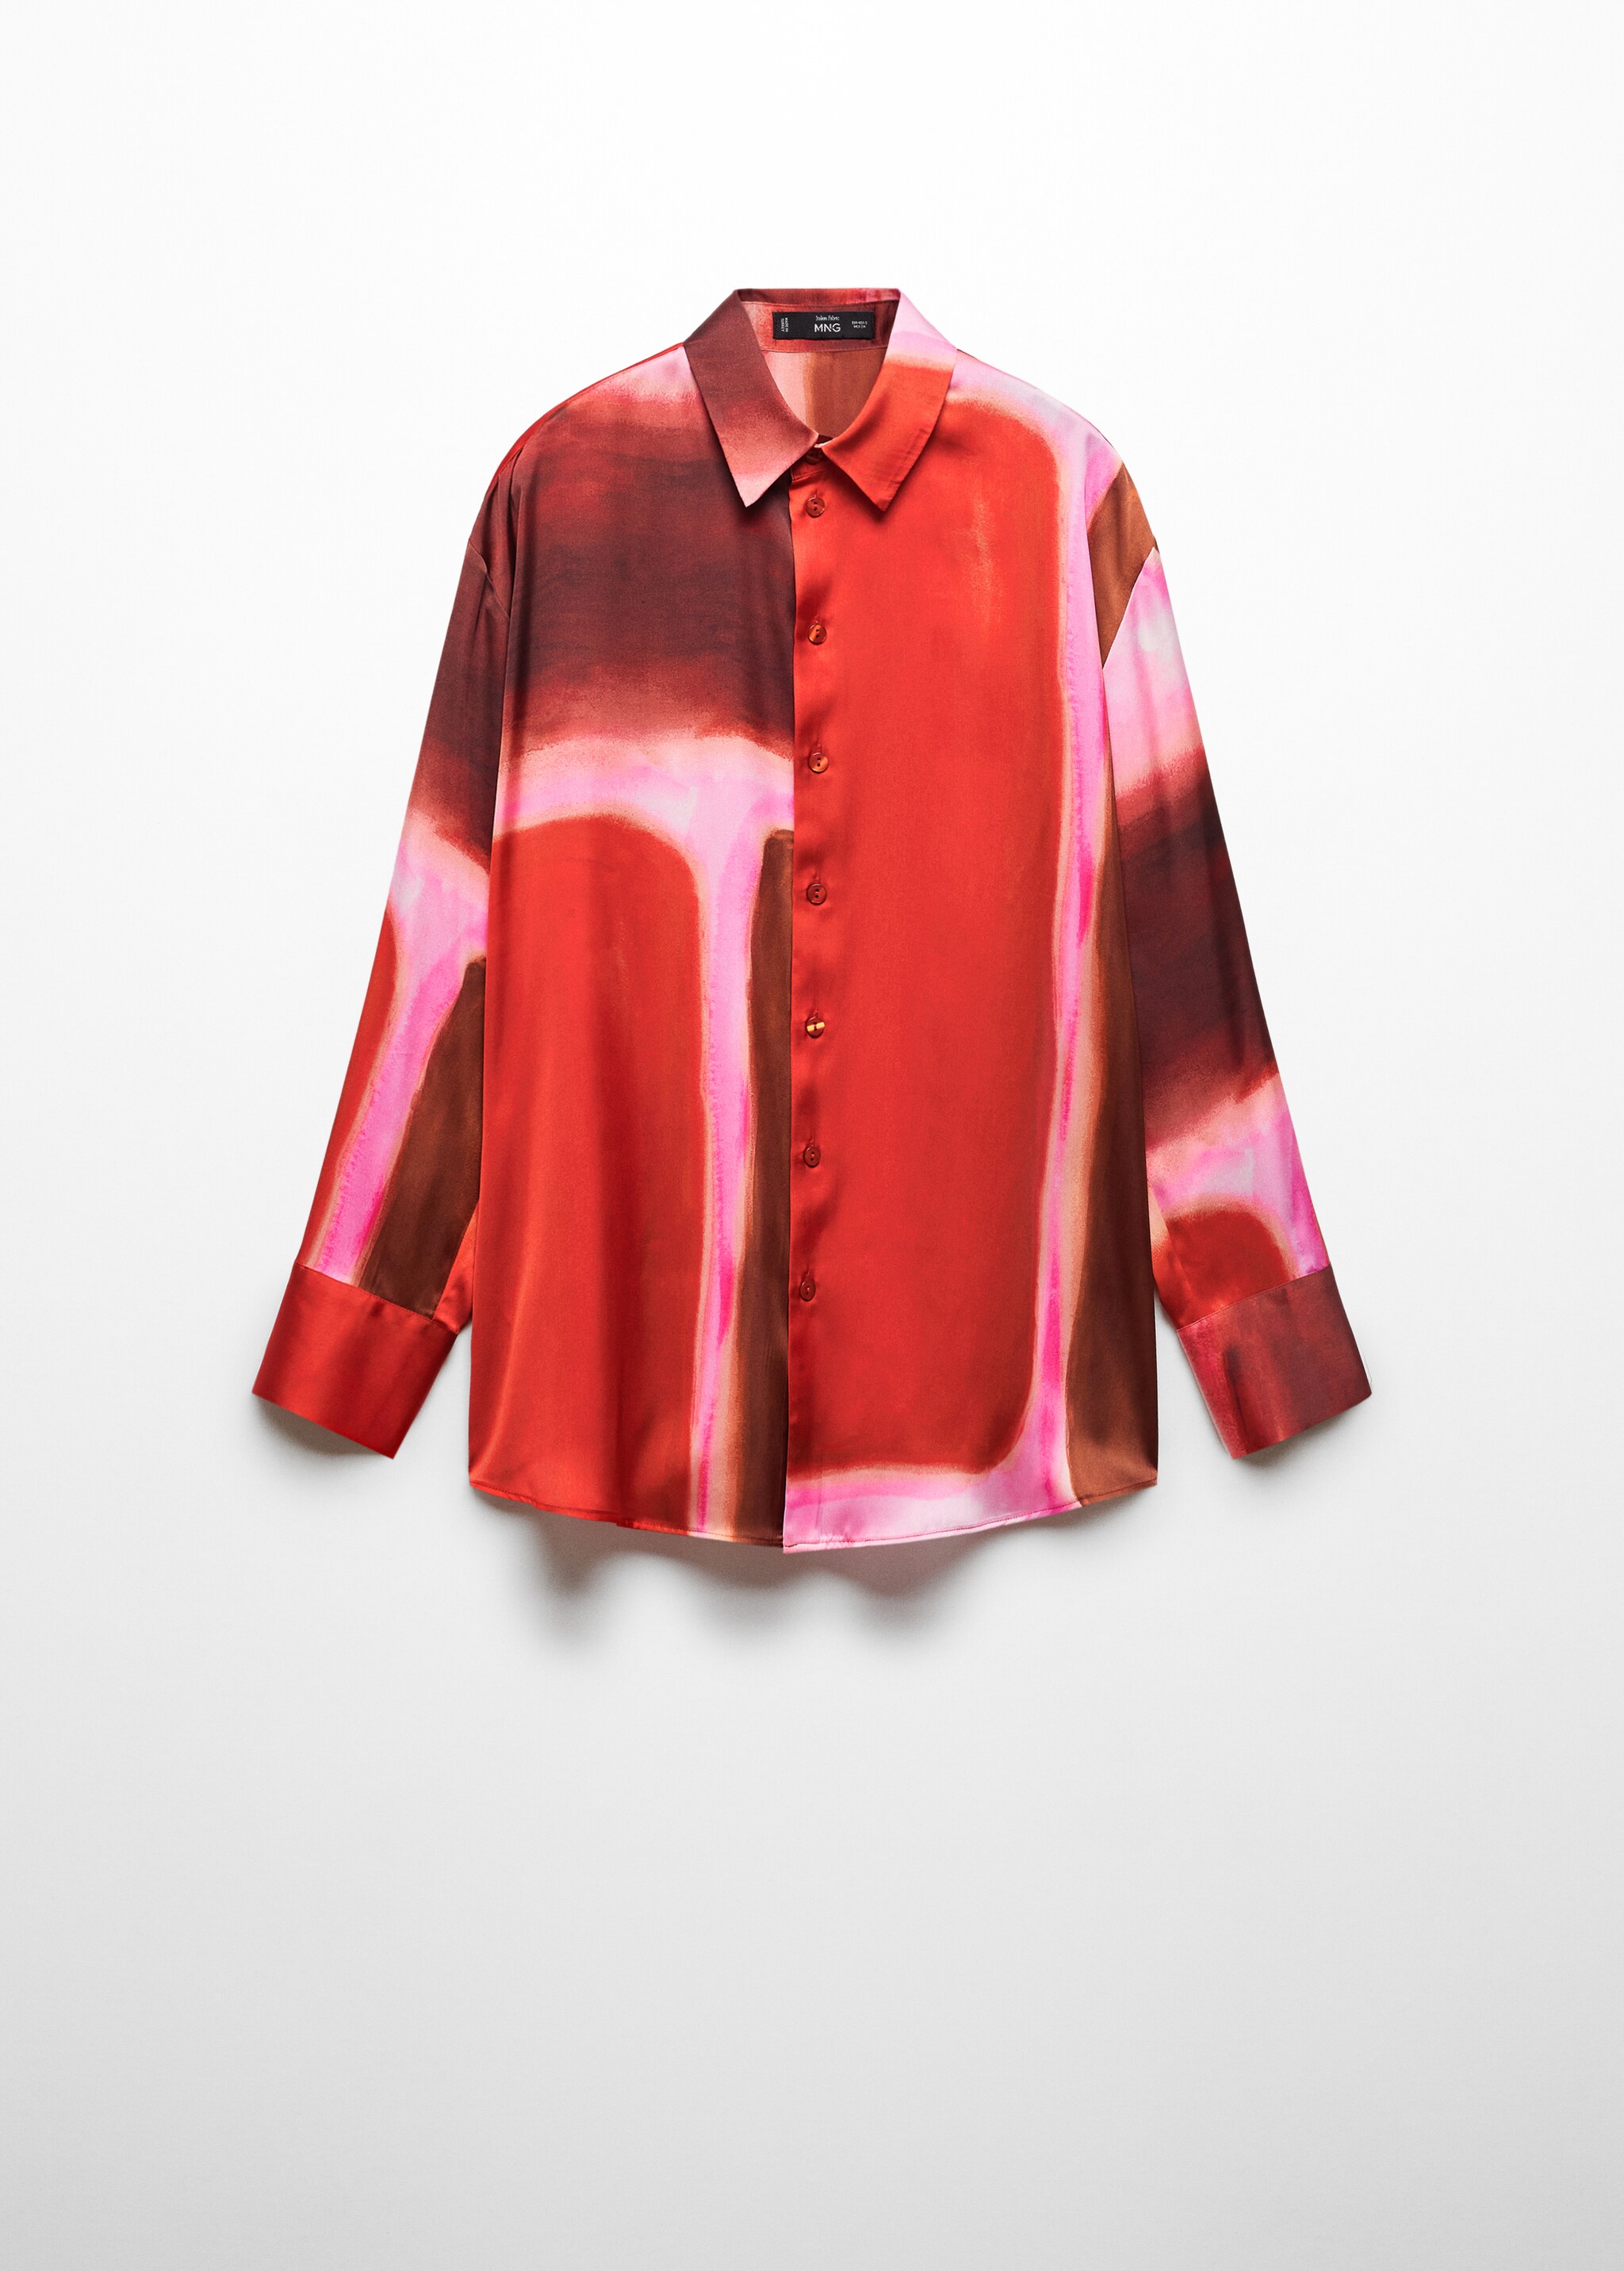 Satin tie-dye shirt - Article without model